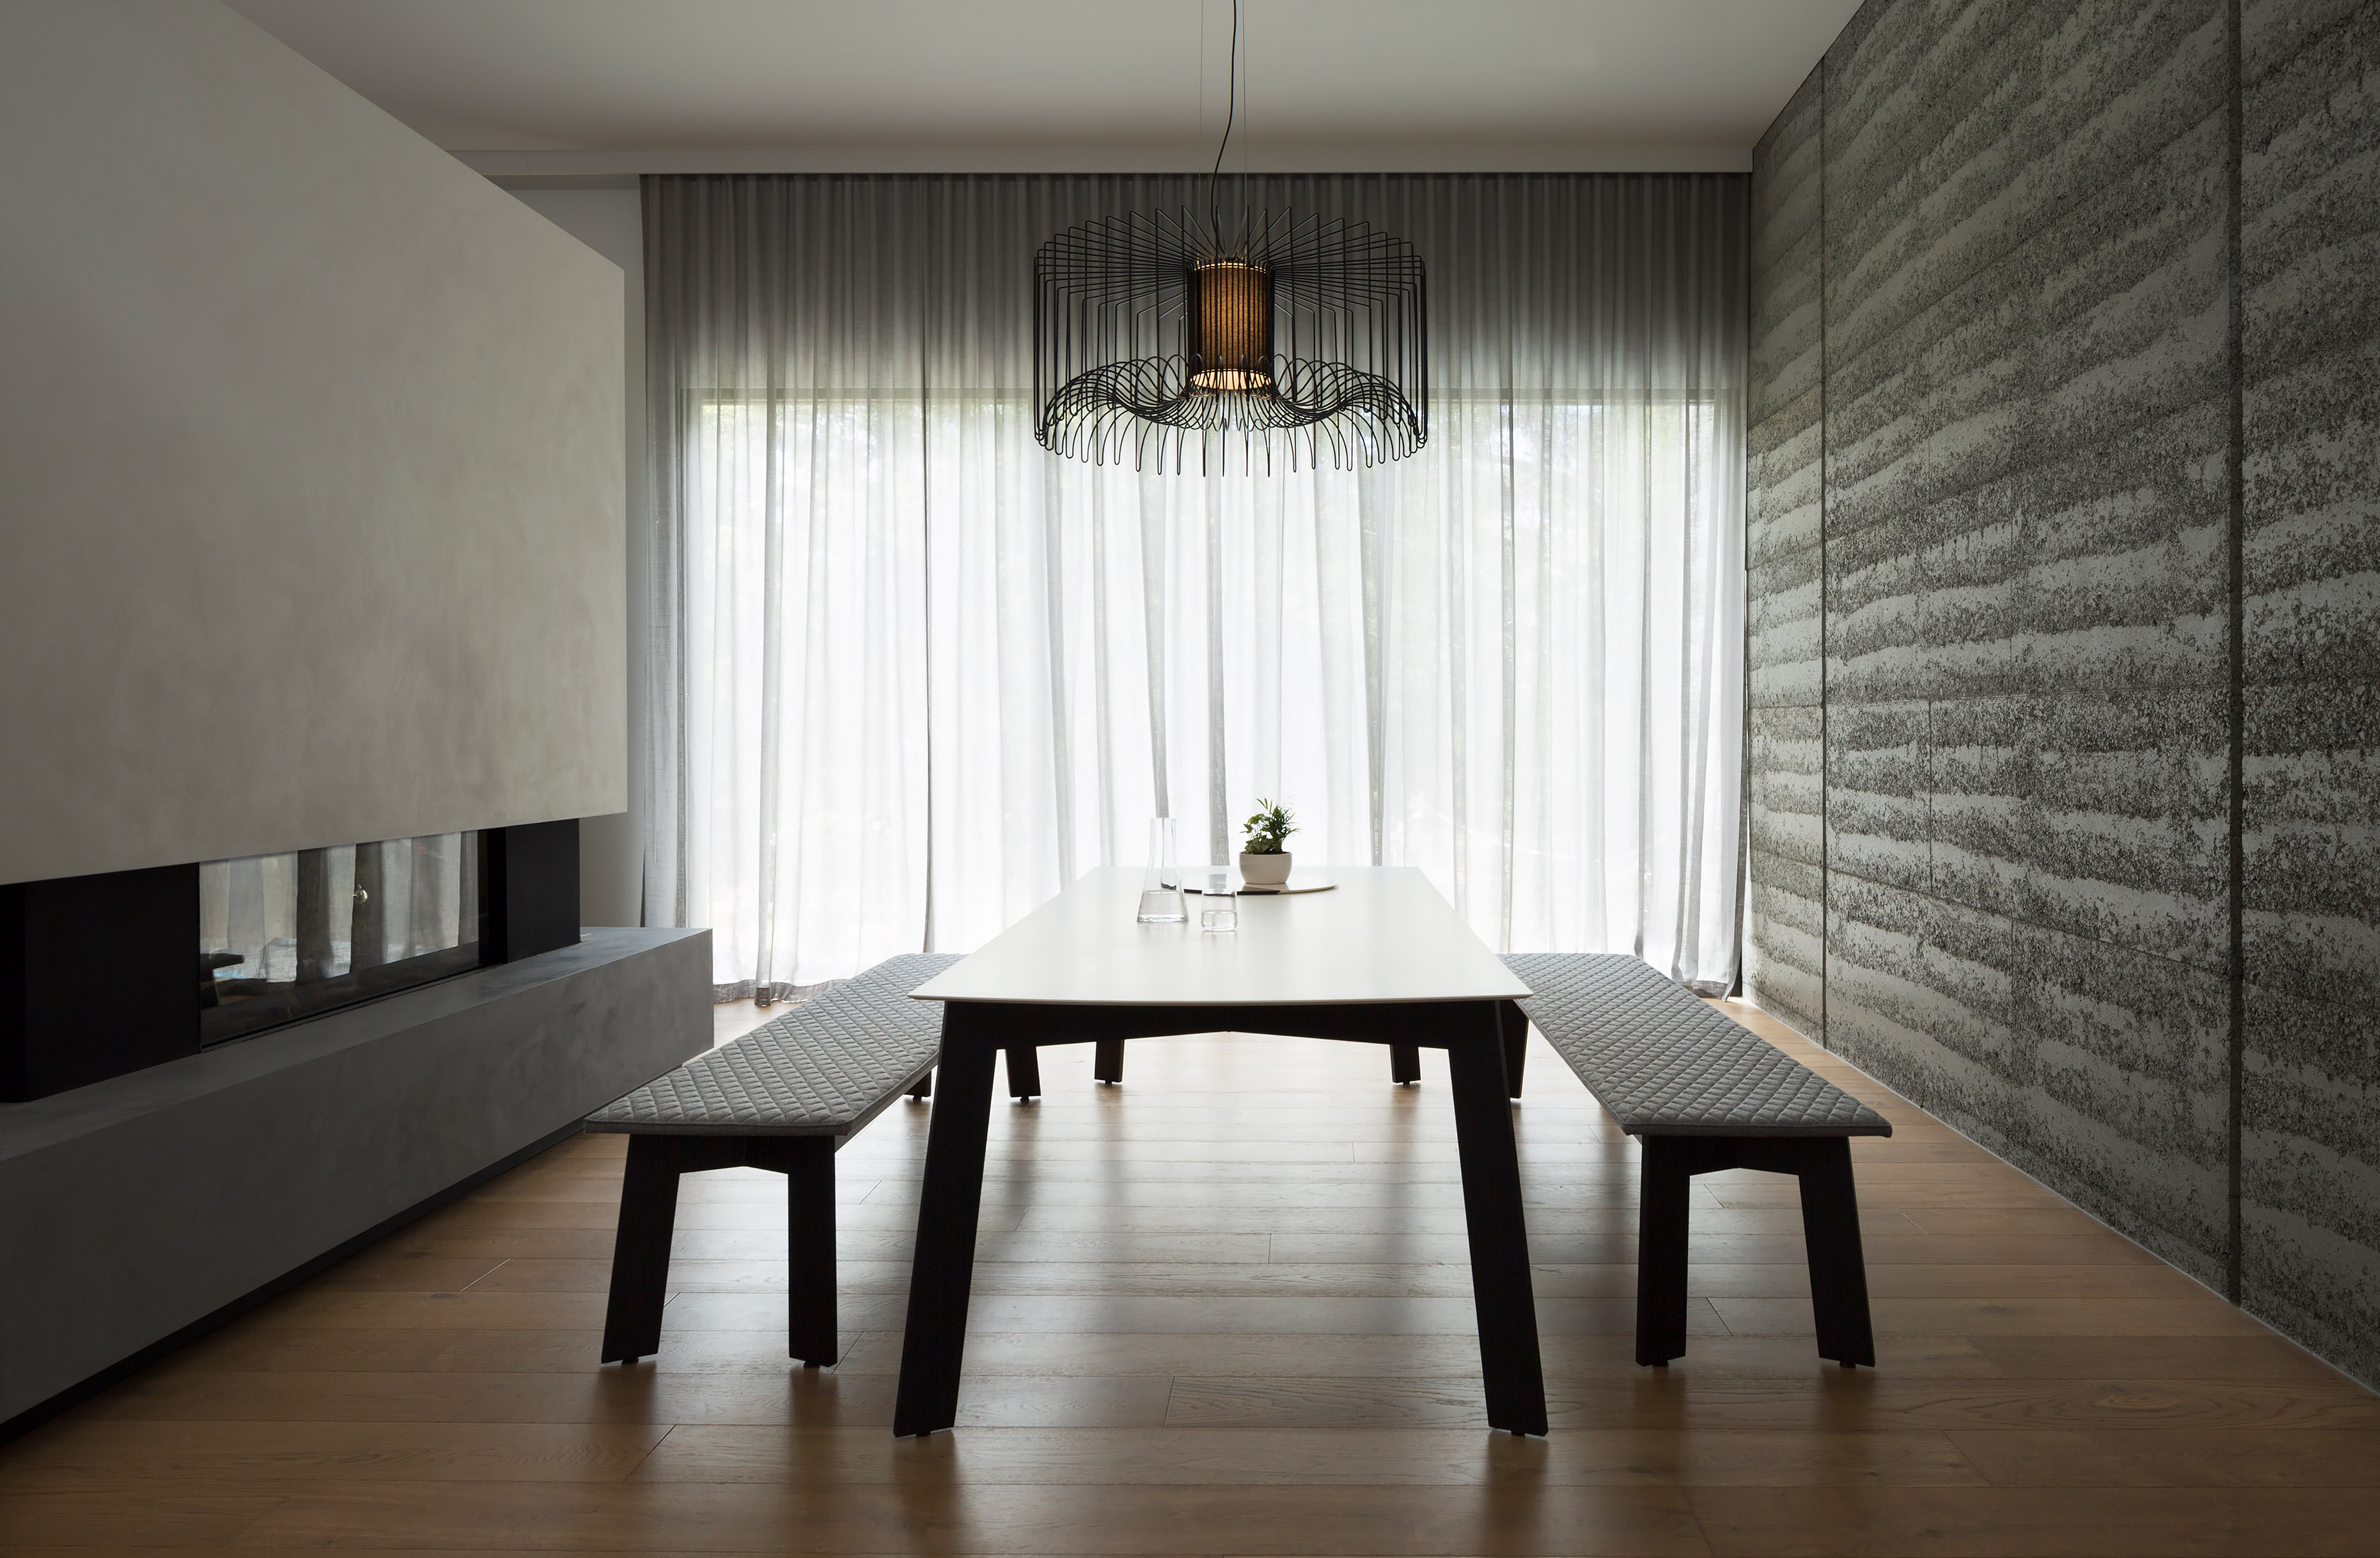 The soft linen curtains allow dappled light to filter through into this stunning dining room onto Australian designer FrancoCrea's minimalist dining table and bench seats.